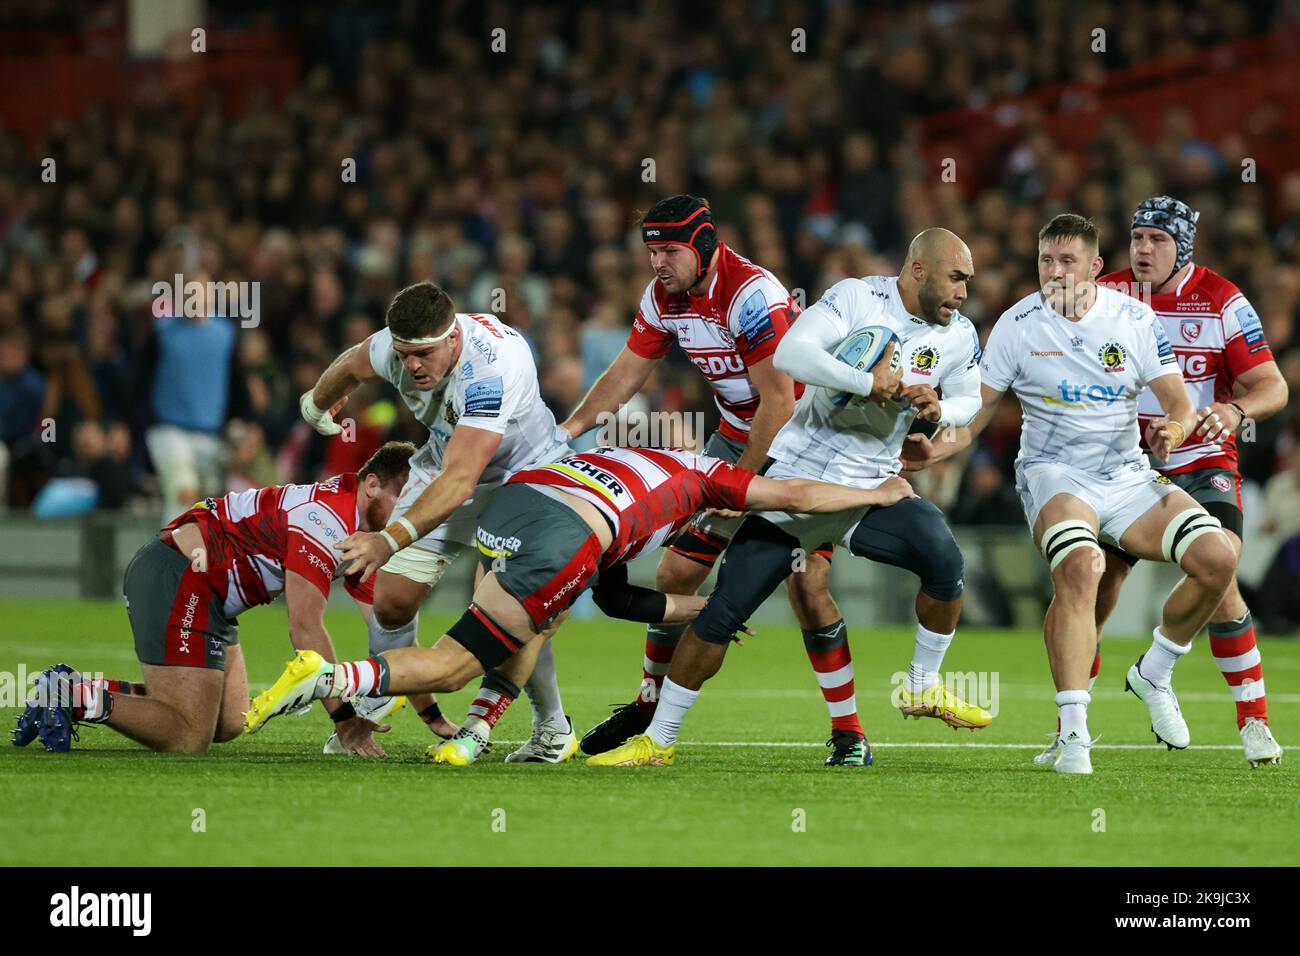 Olly Woodburn of Exeter Chiefs is tackled by Freddie Clarke of Gloucester Rugby during the Gallagher Premiership match Gloucester Rugby vs Exeter Chiefs at Kingsholm Stadium , Gloucester, United Kingdom, 28th October